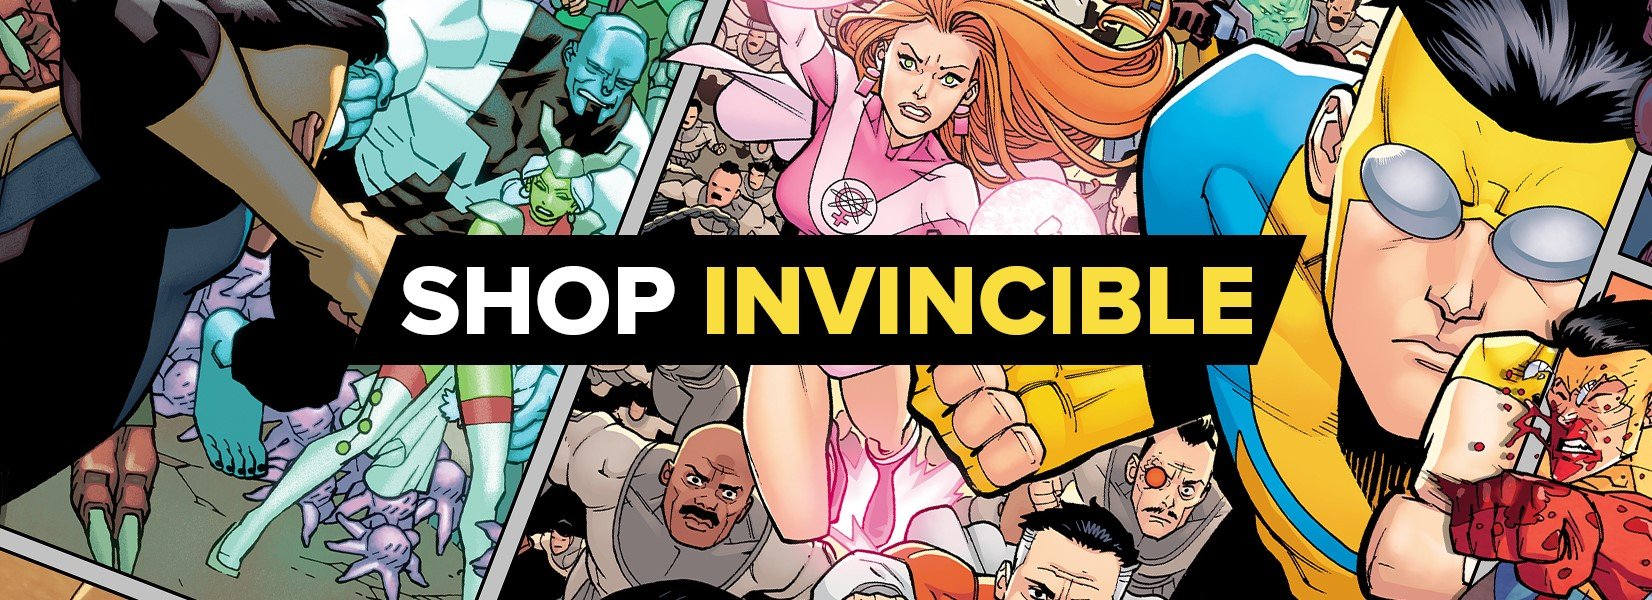 Invincible compilation image with a button reading shop Invincible